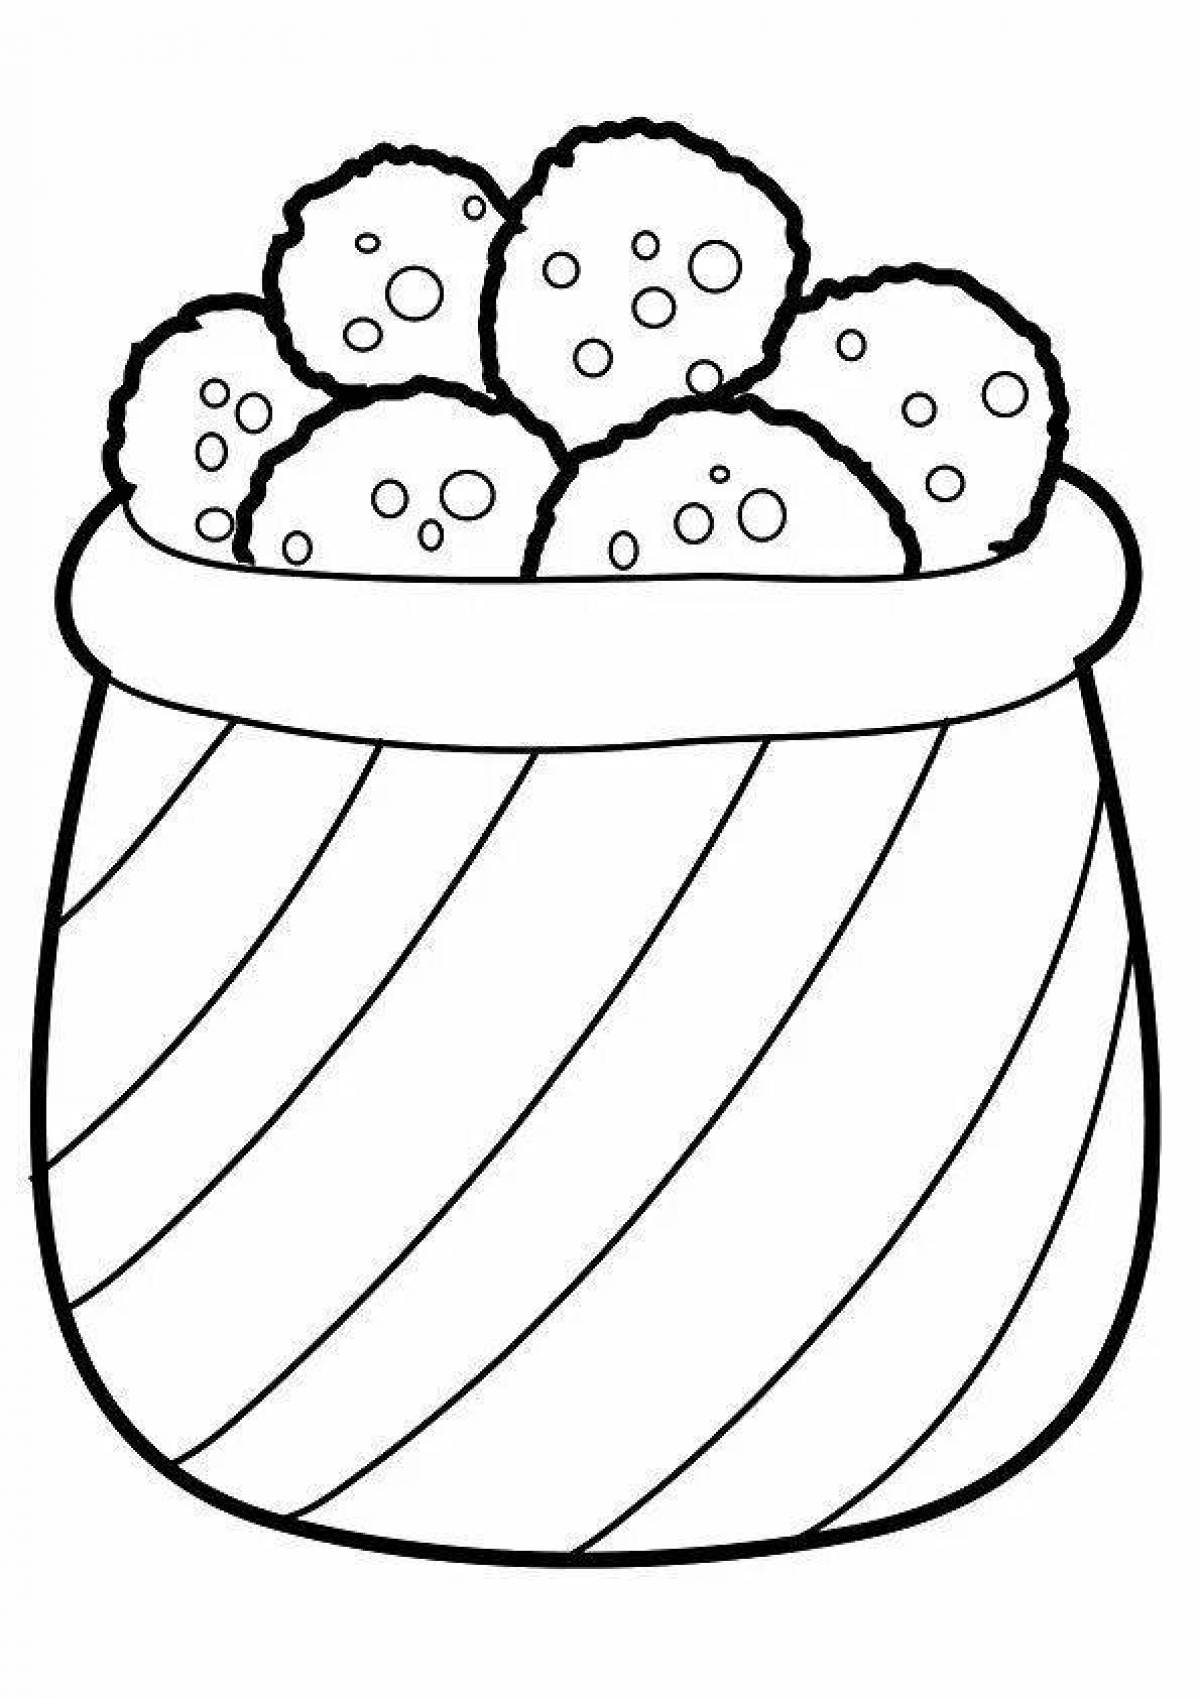 Amazing marmalade coloring page